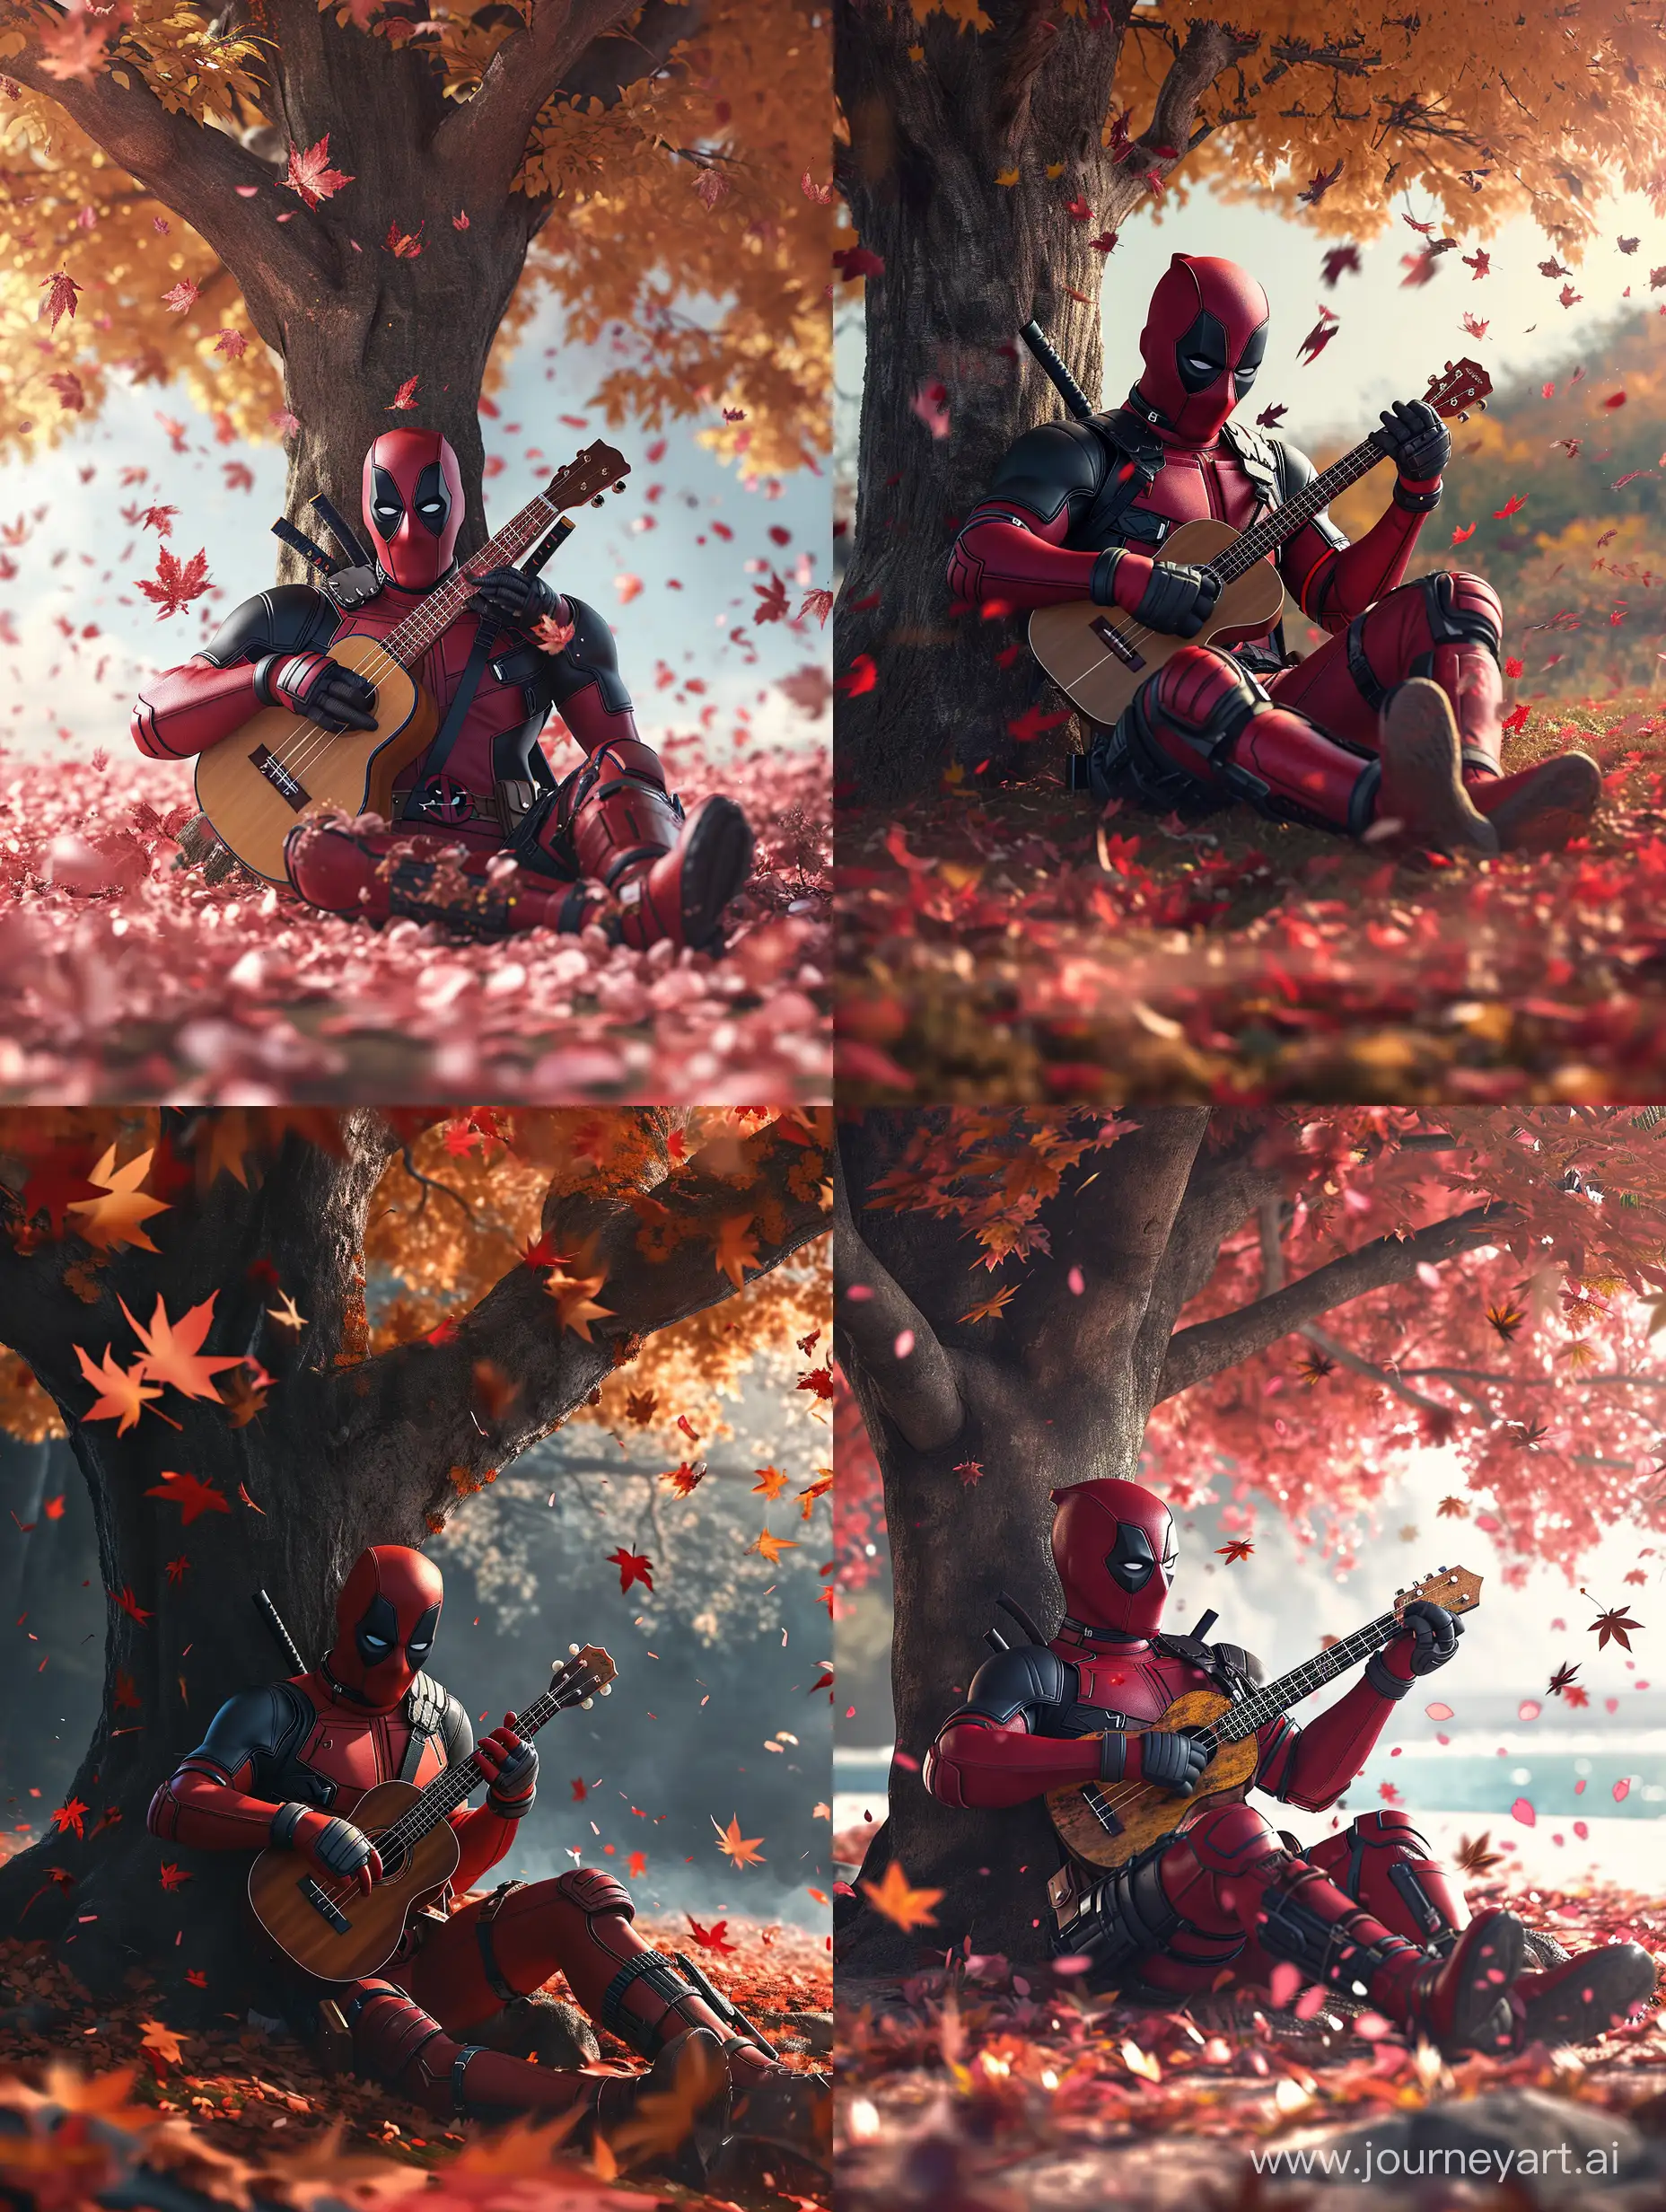 Deadpool sits under a tree and plays his ukulele, Sakura leaves are falling, cute, photorealistic, ultra-detailed, 4k